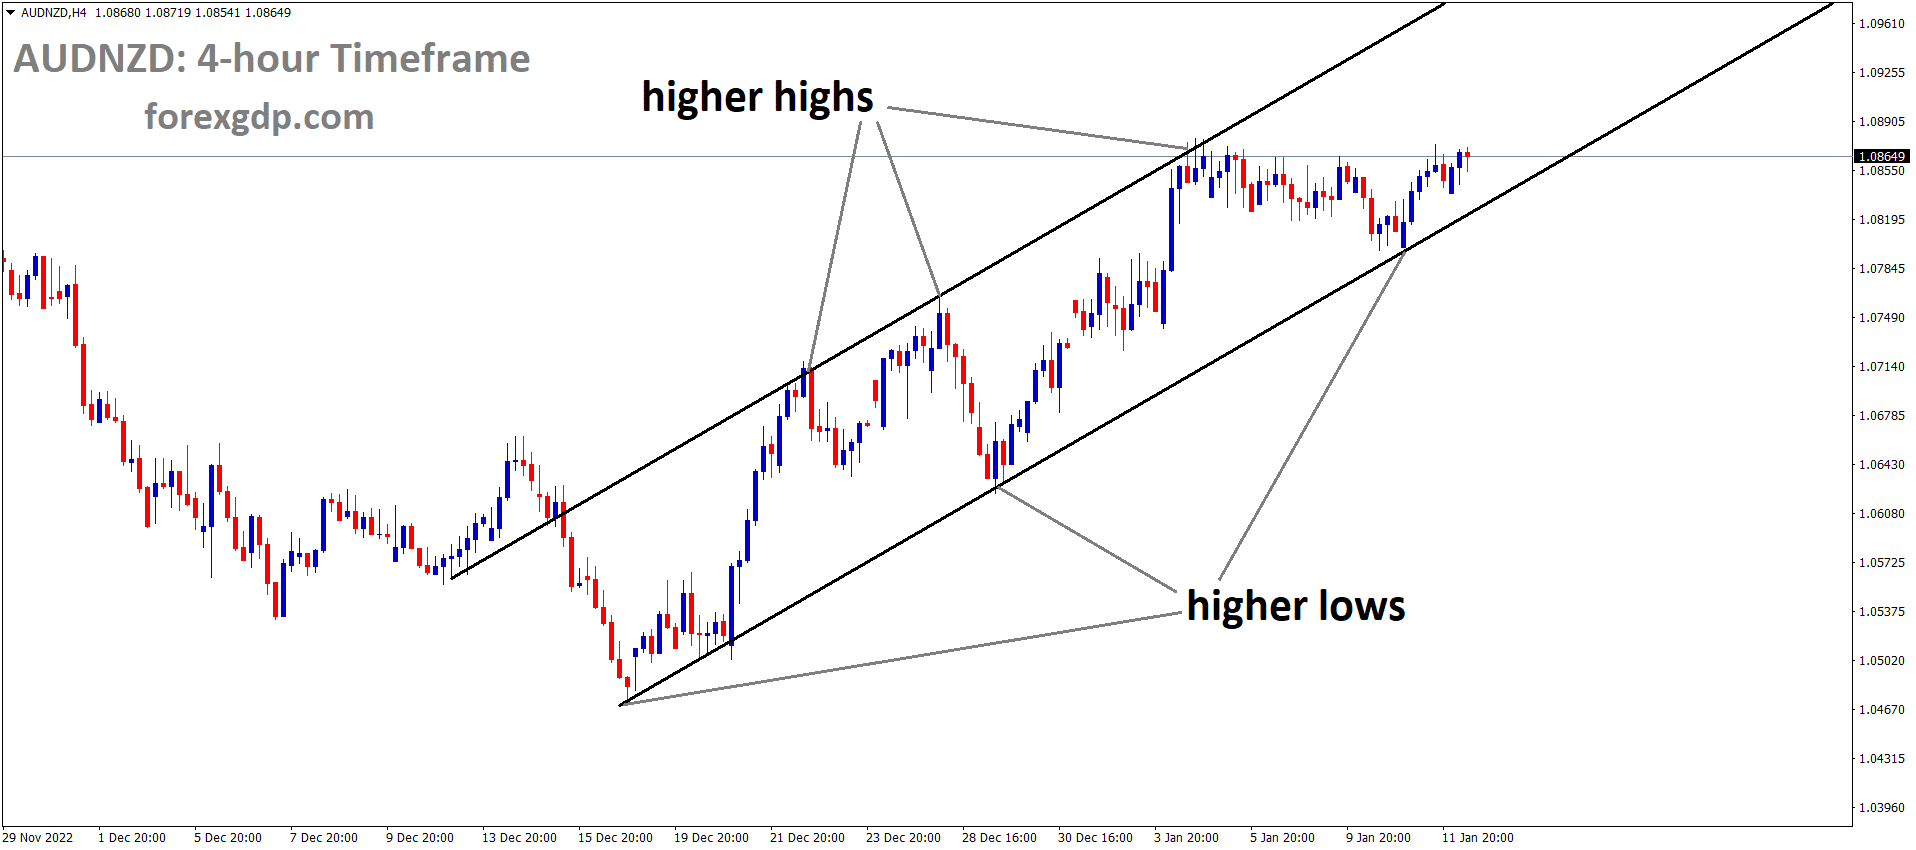 AUDNZD is moving in an Ascending channel and the market has rebounded from the higher low area of the channel